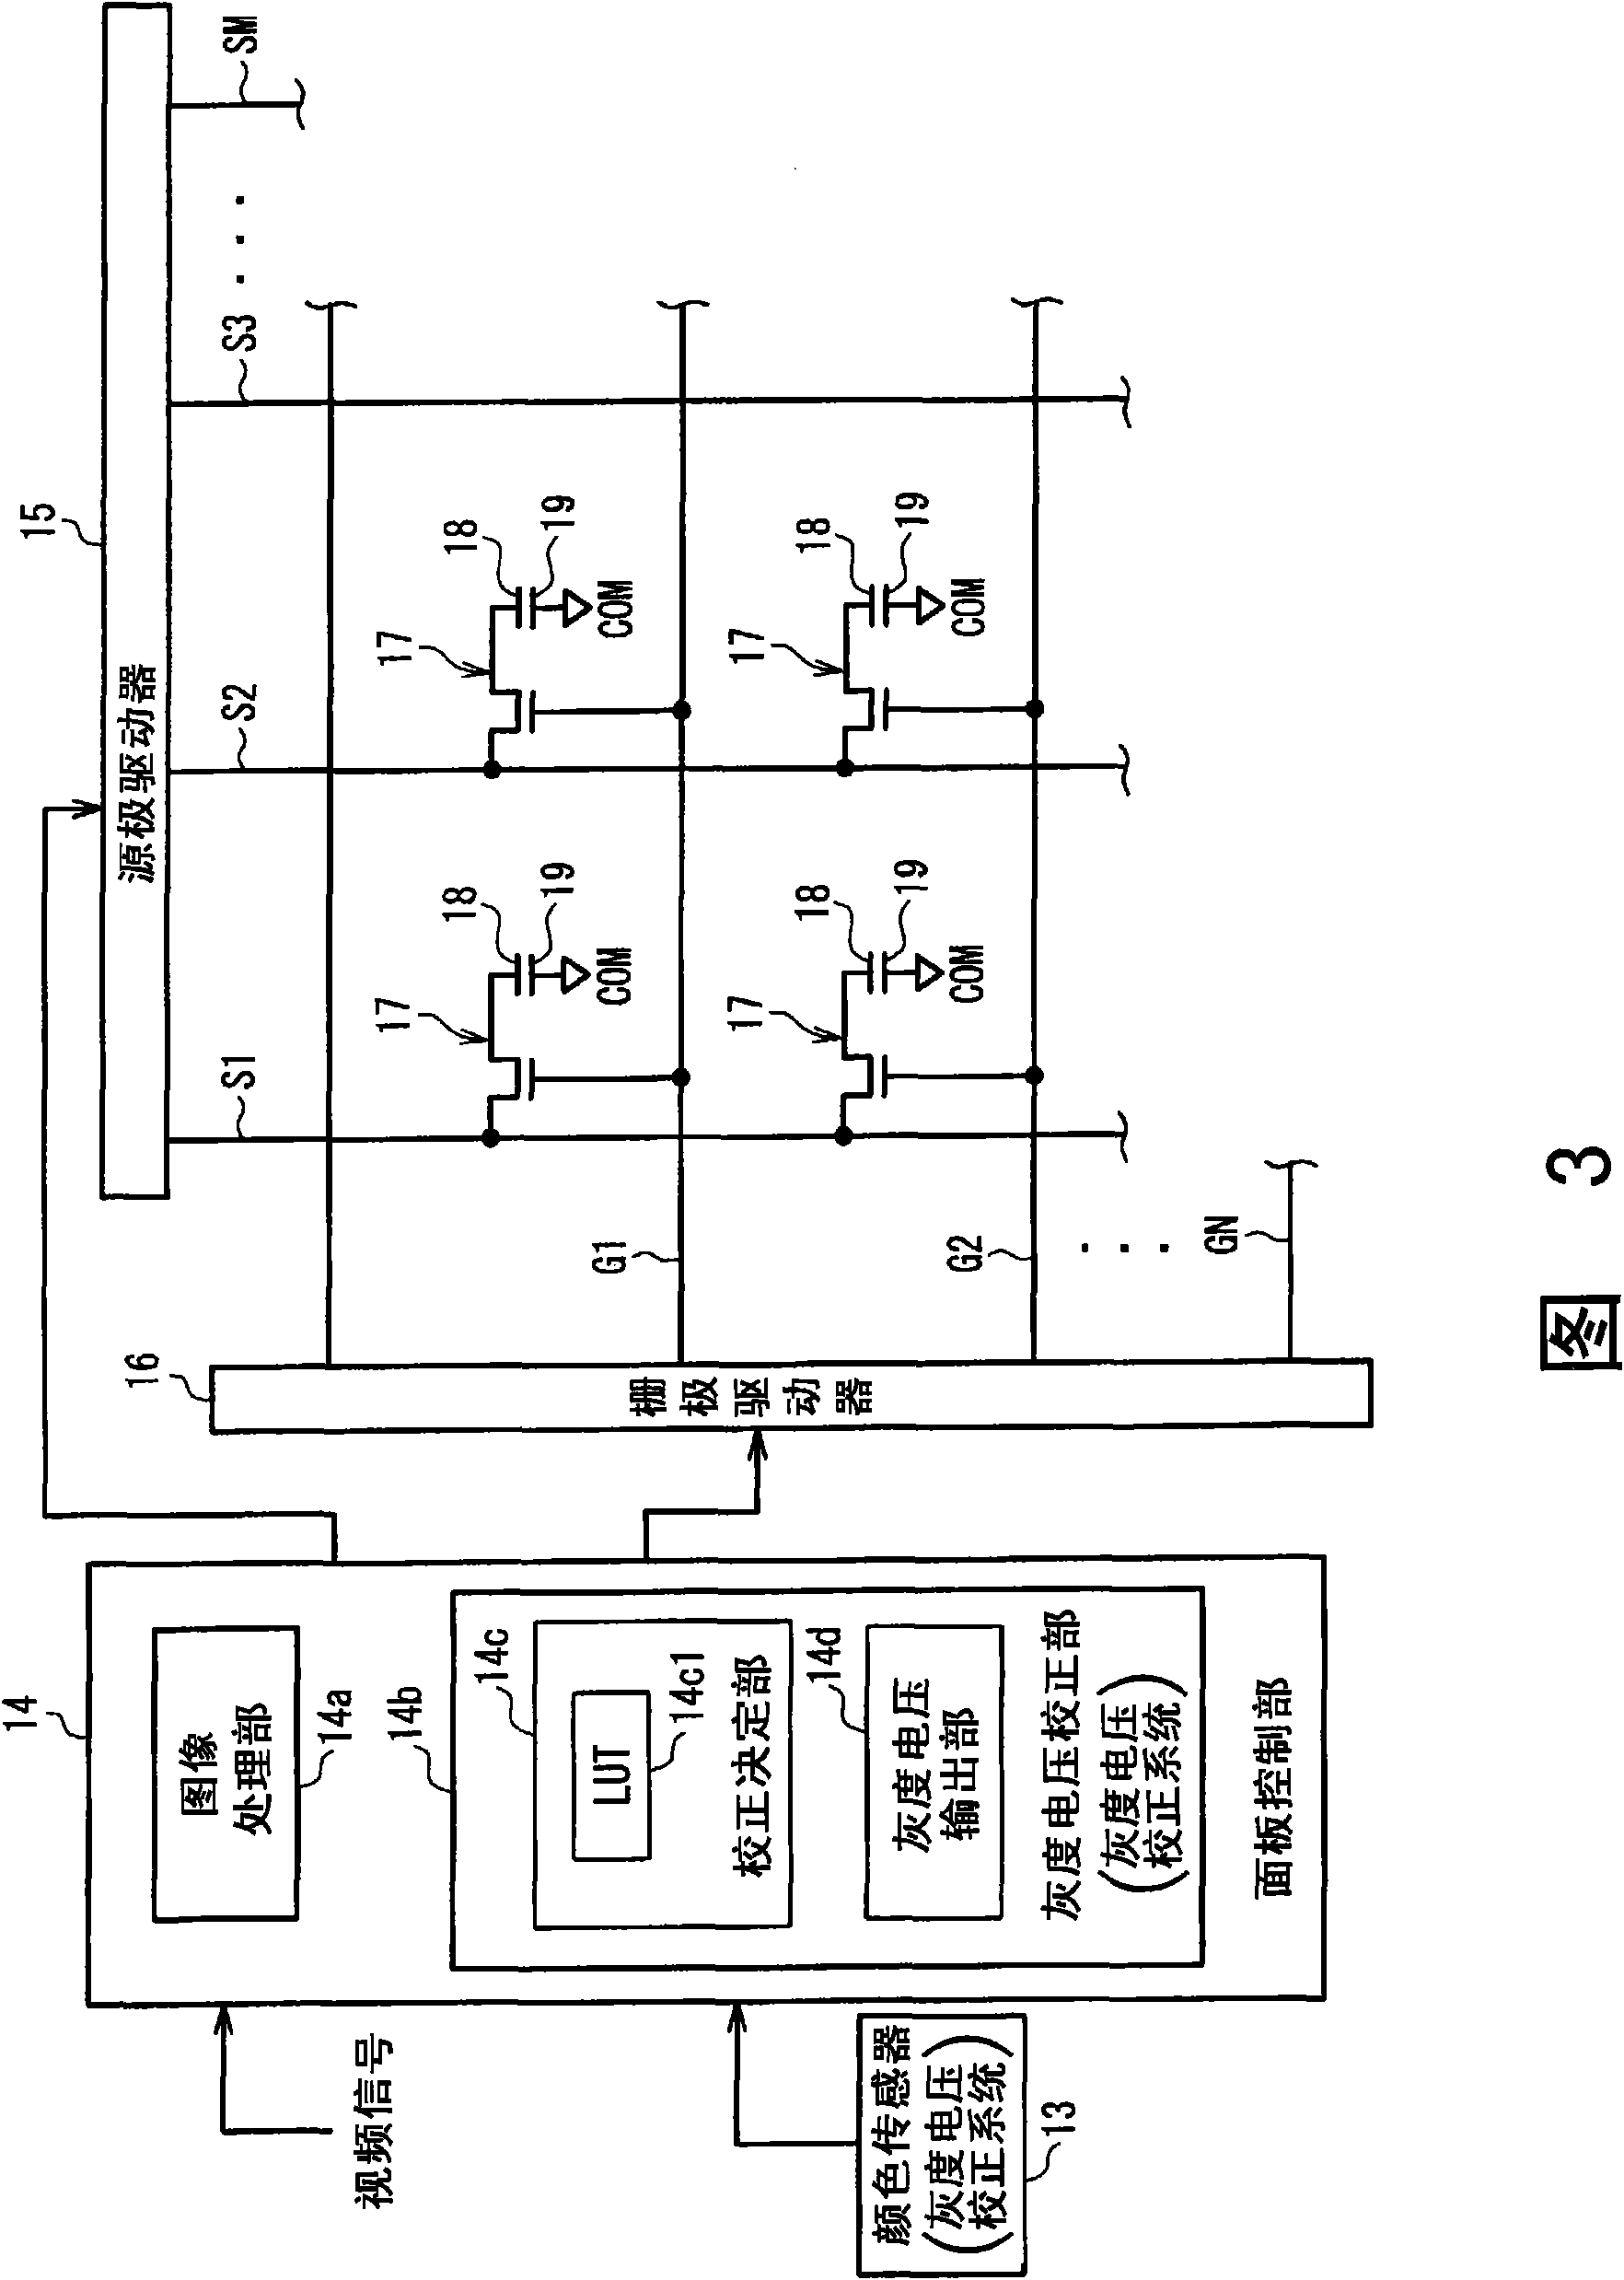 Gradation voltage correction system and display apparatus utilizing the same